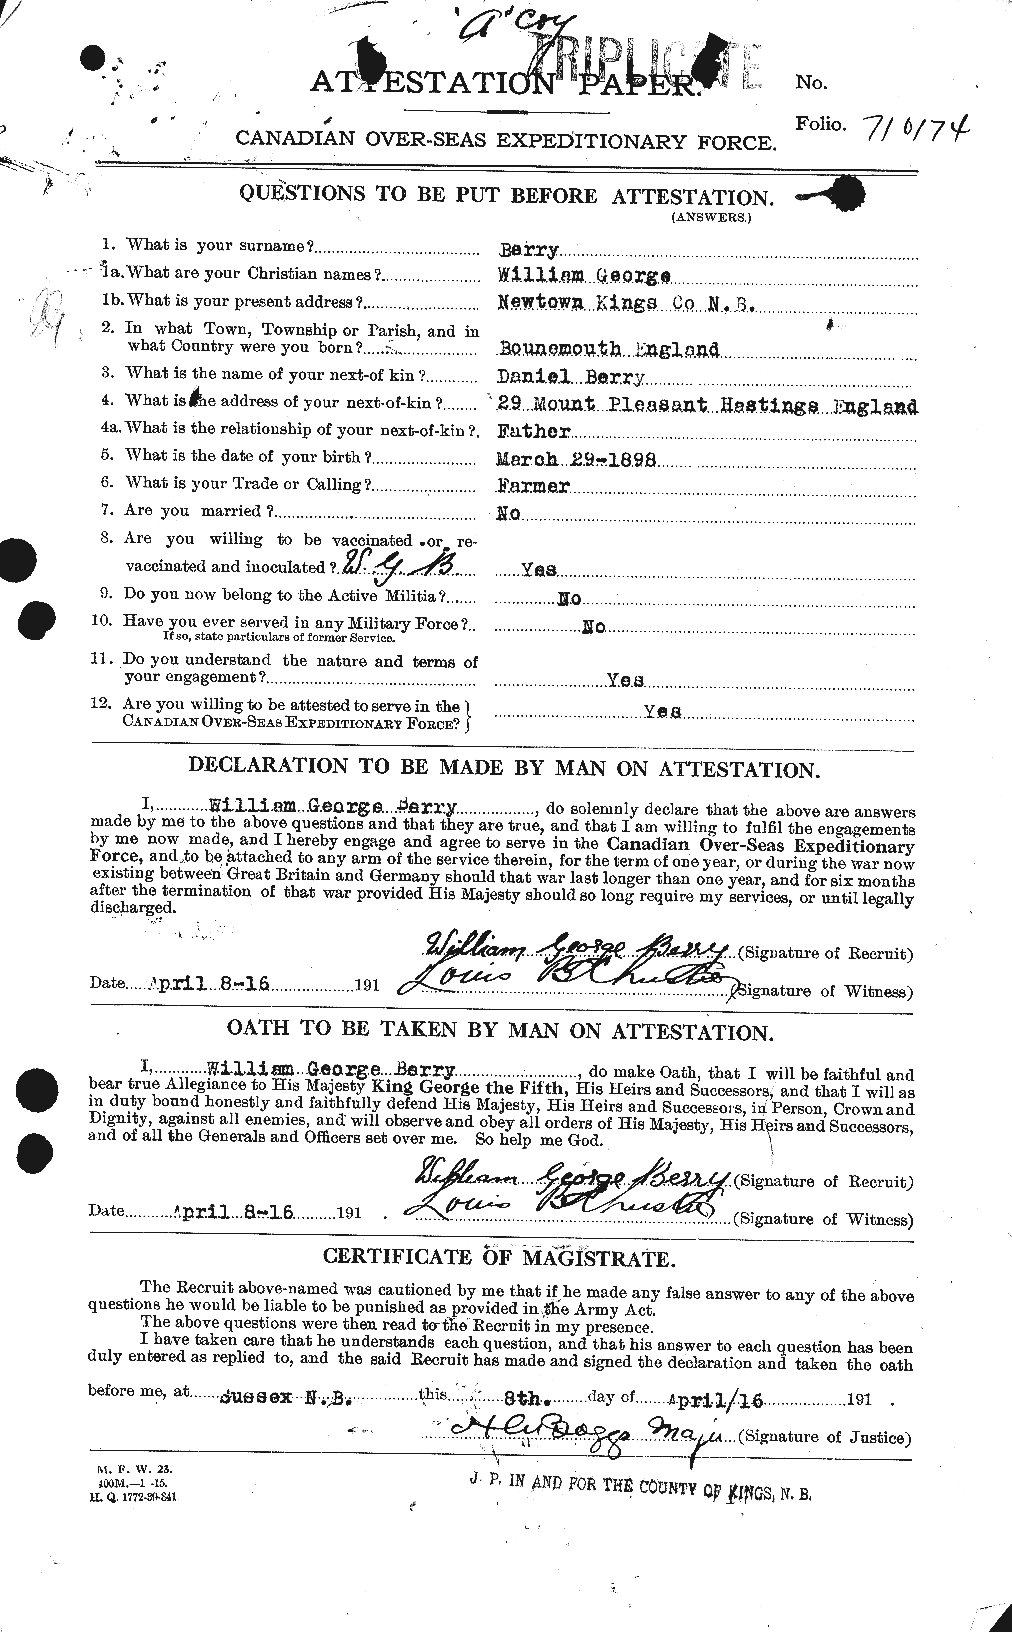 Personnel Records of the First World War - CEF 235499a